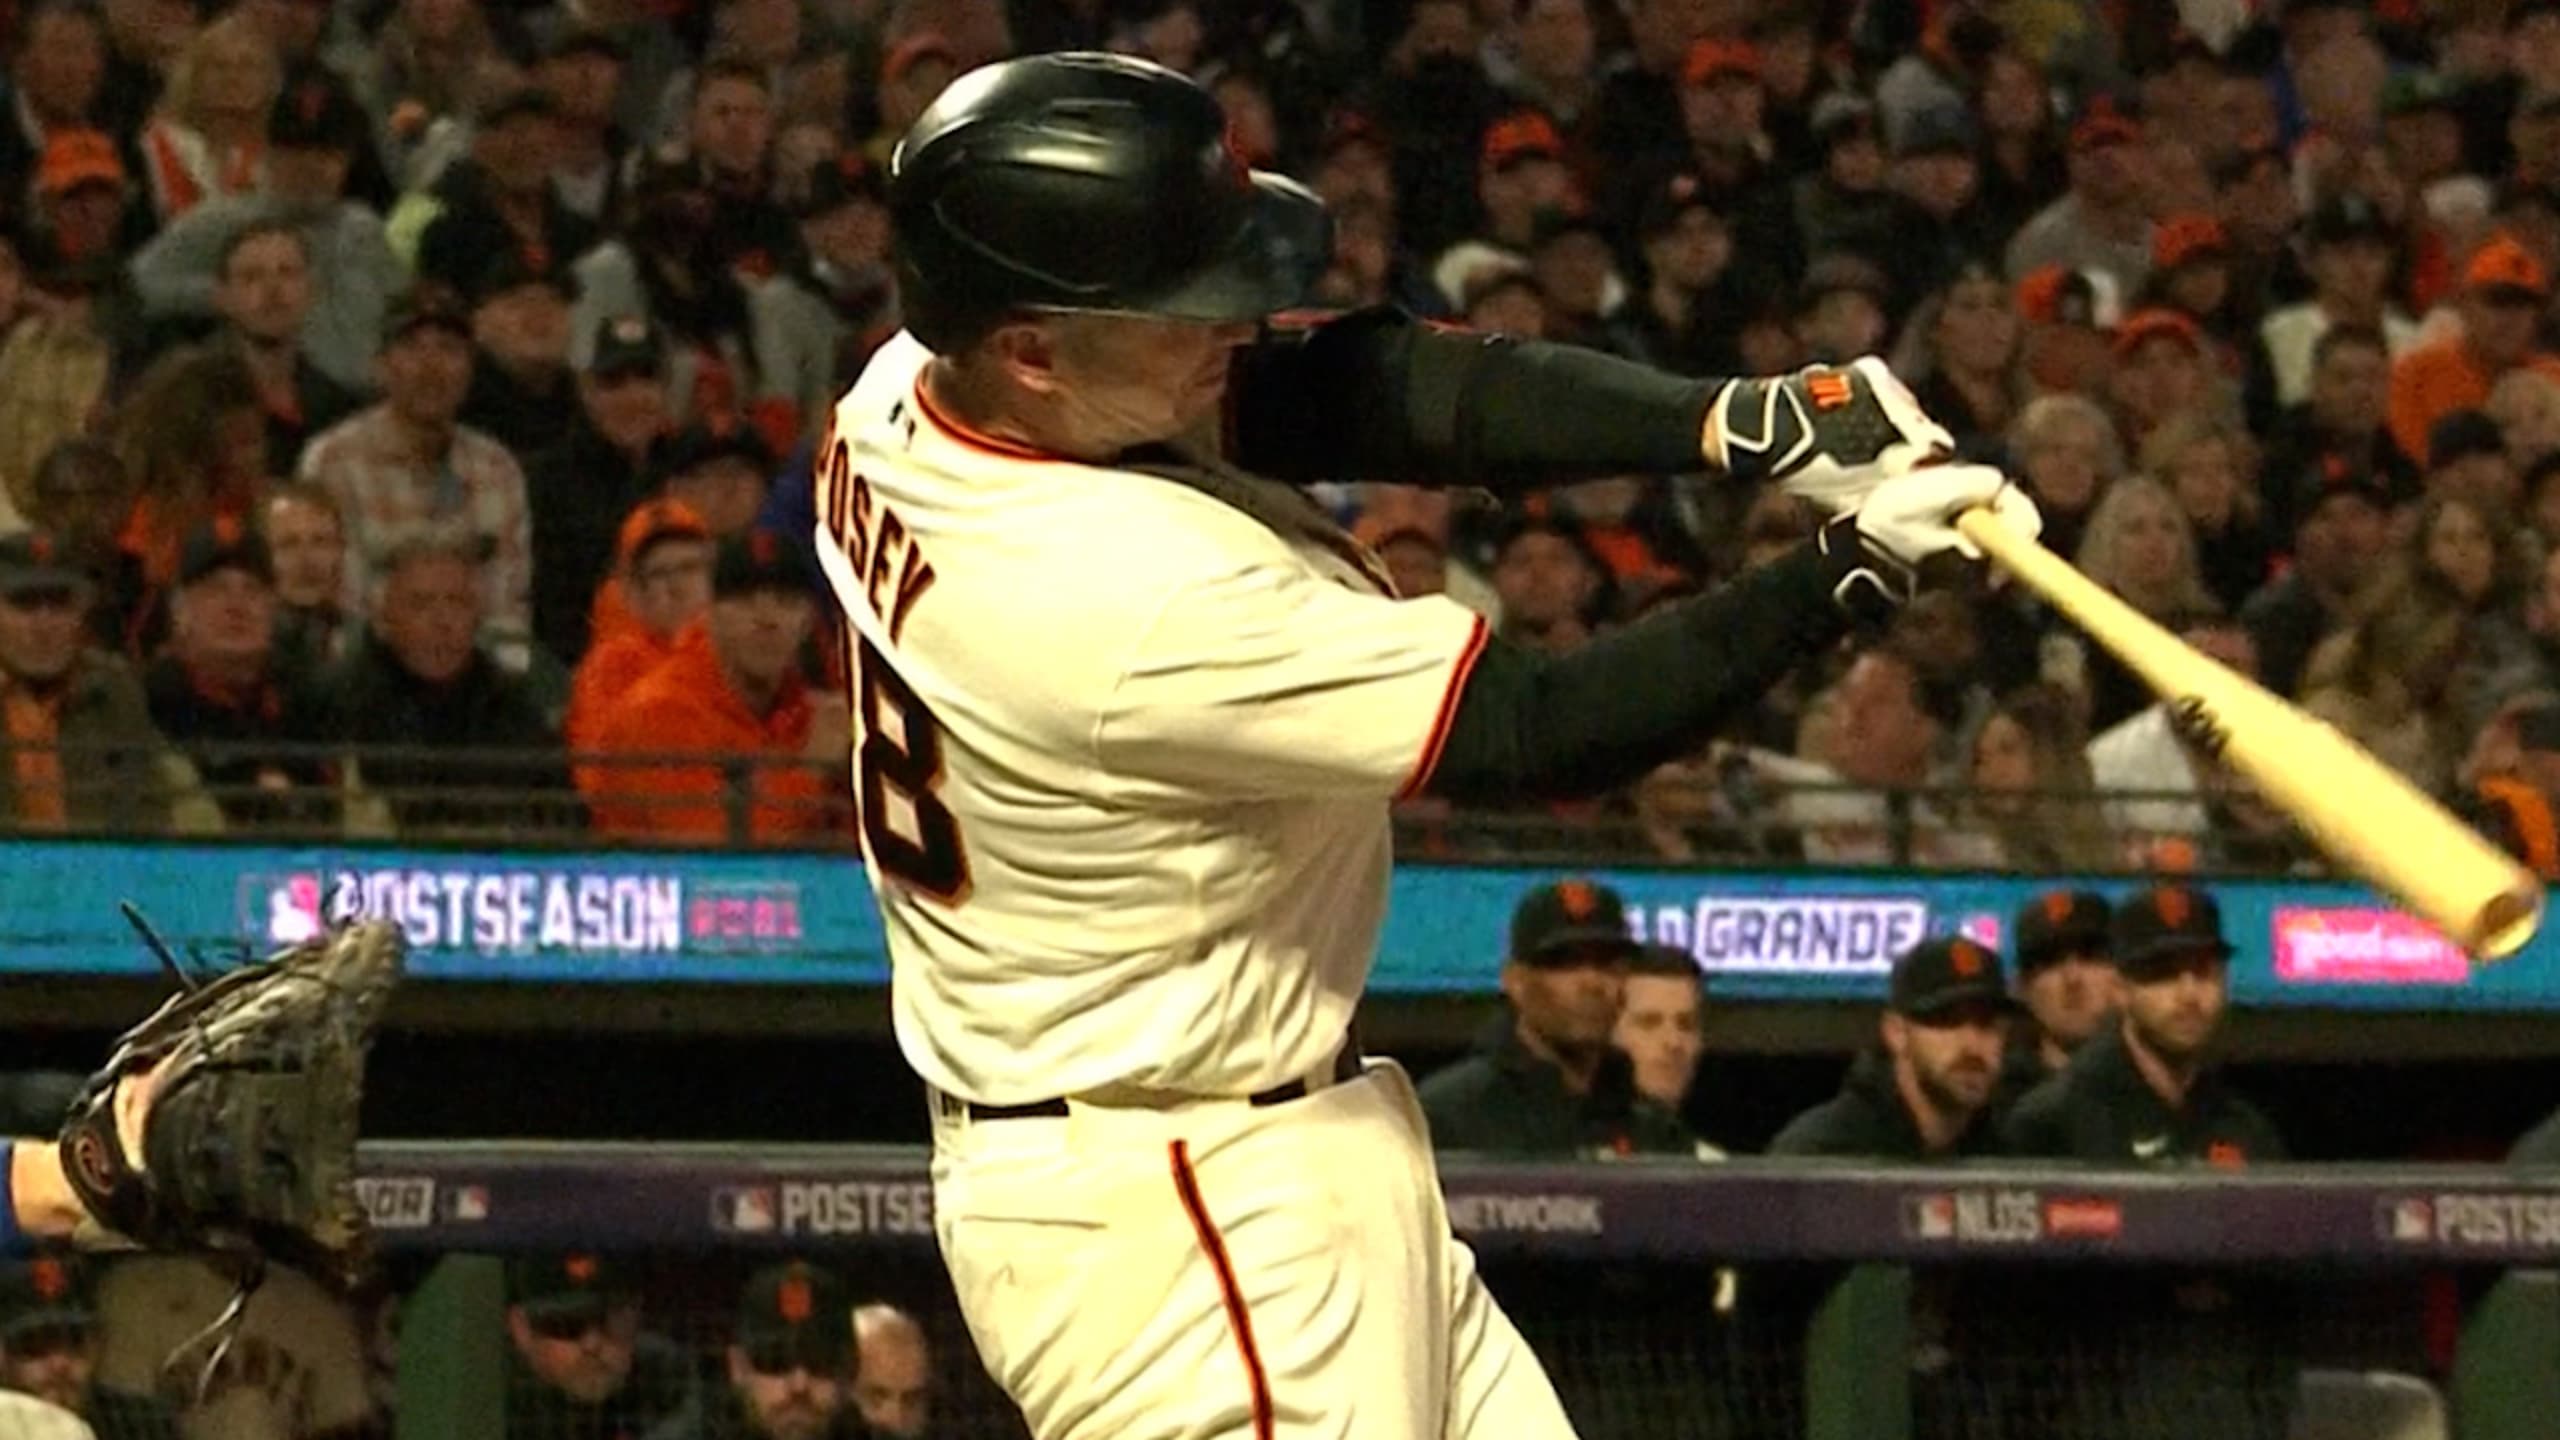 HALL OF FAMER: Buster Posey is retiring from MLB. If Posey's a